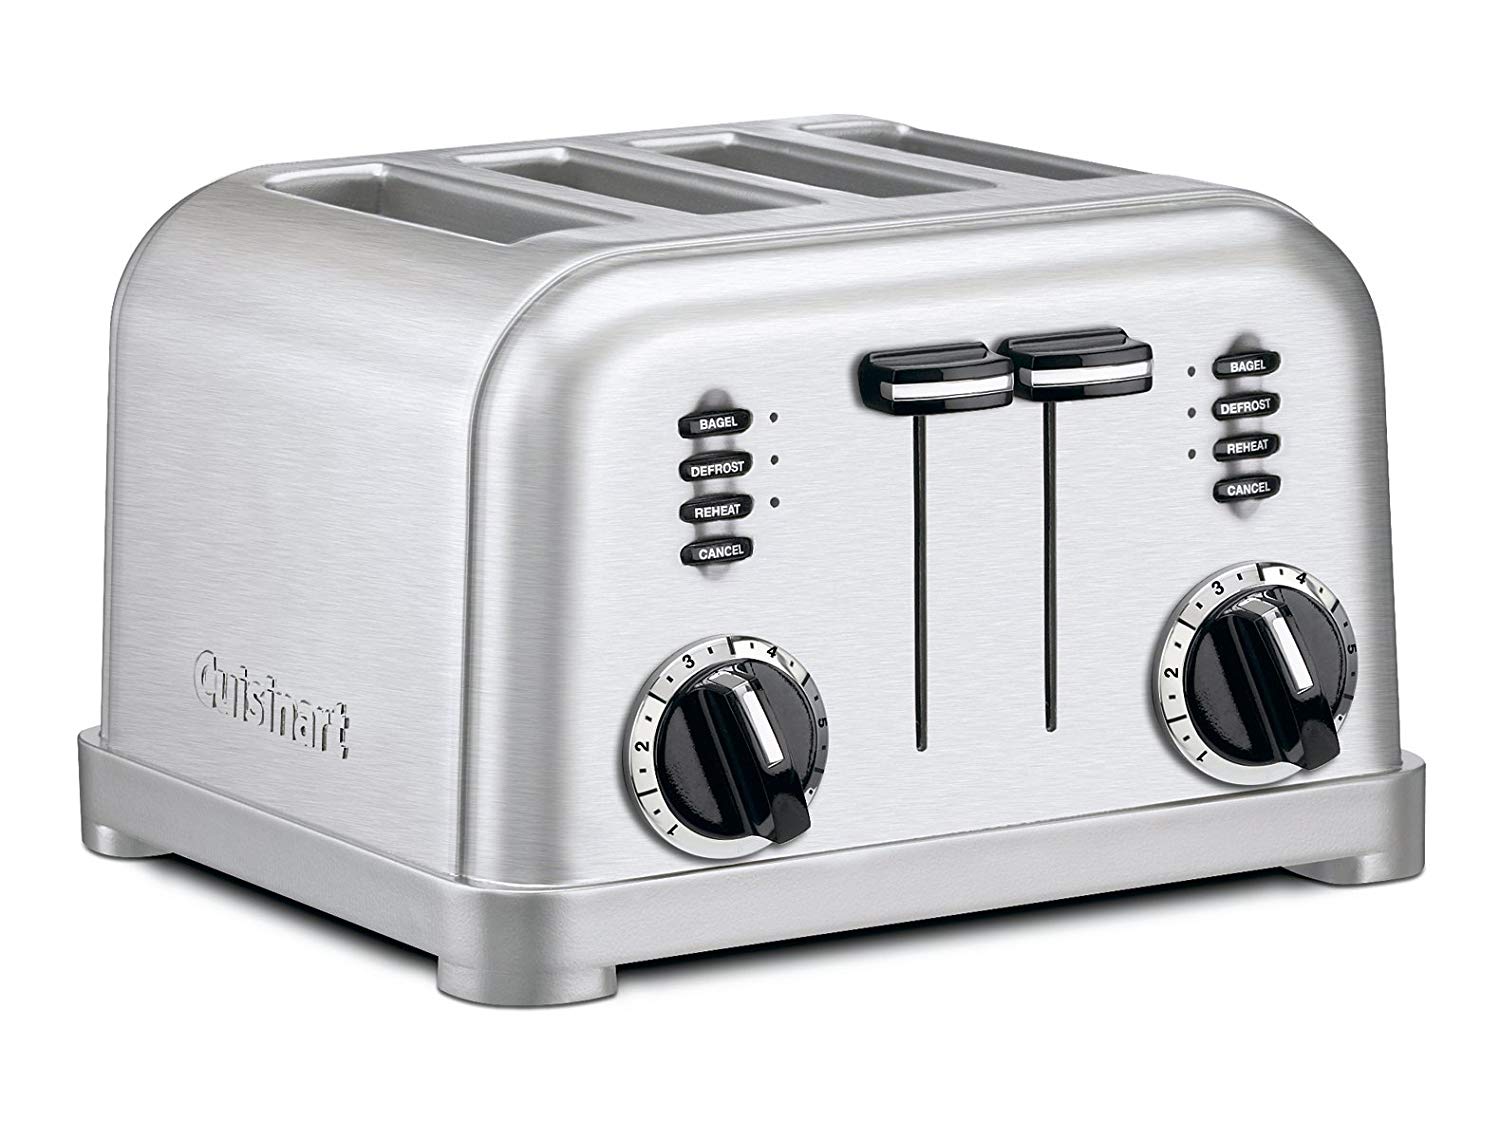 Cuisinart Brushed Stainless 4 Slice Classic Toaster - image 2 of 6